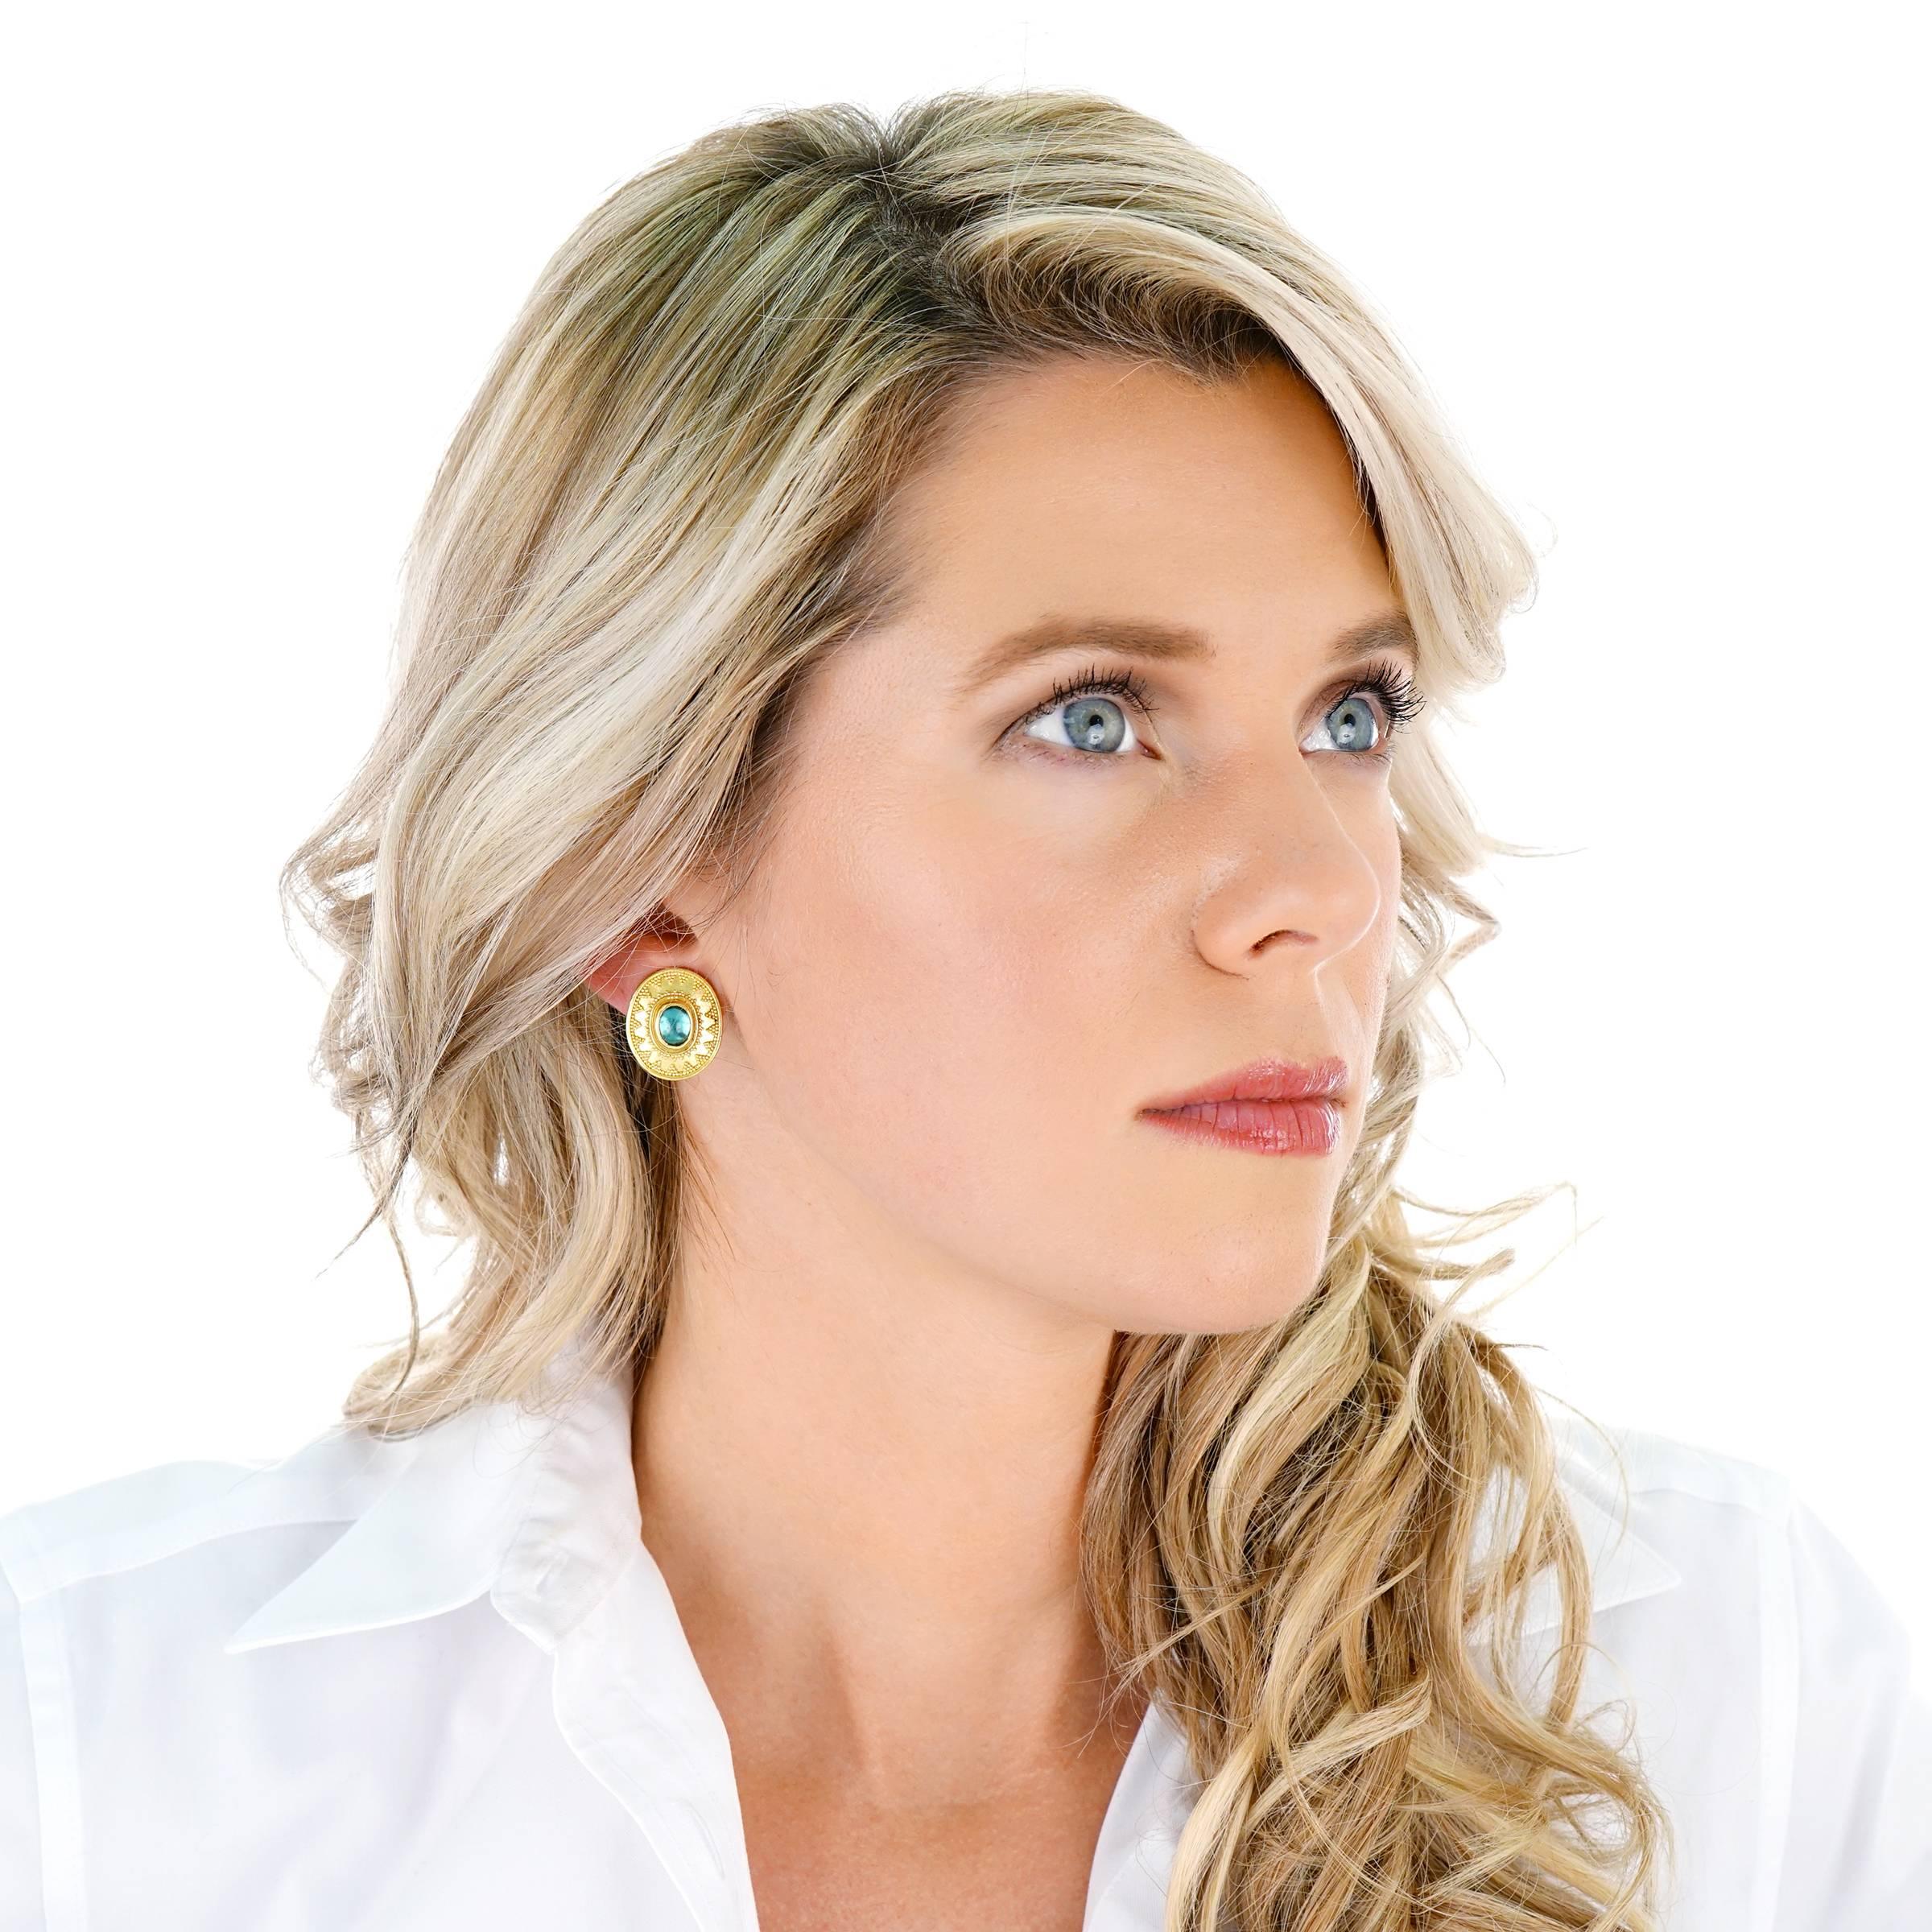 Circa 2000s, 22k/18k, Maija Neimanis, American. These chic Archaic motif earrings by Maija Neimanis are set with vibrant tourmaline cabochons surrounded by delicately intricate granulation. Schooled in ancient techniques, Neimanis transforms